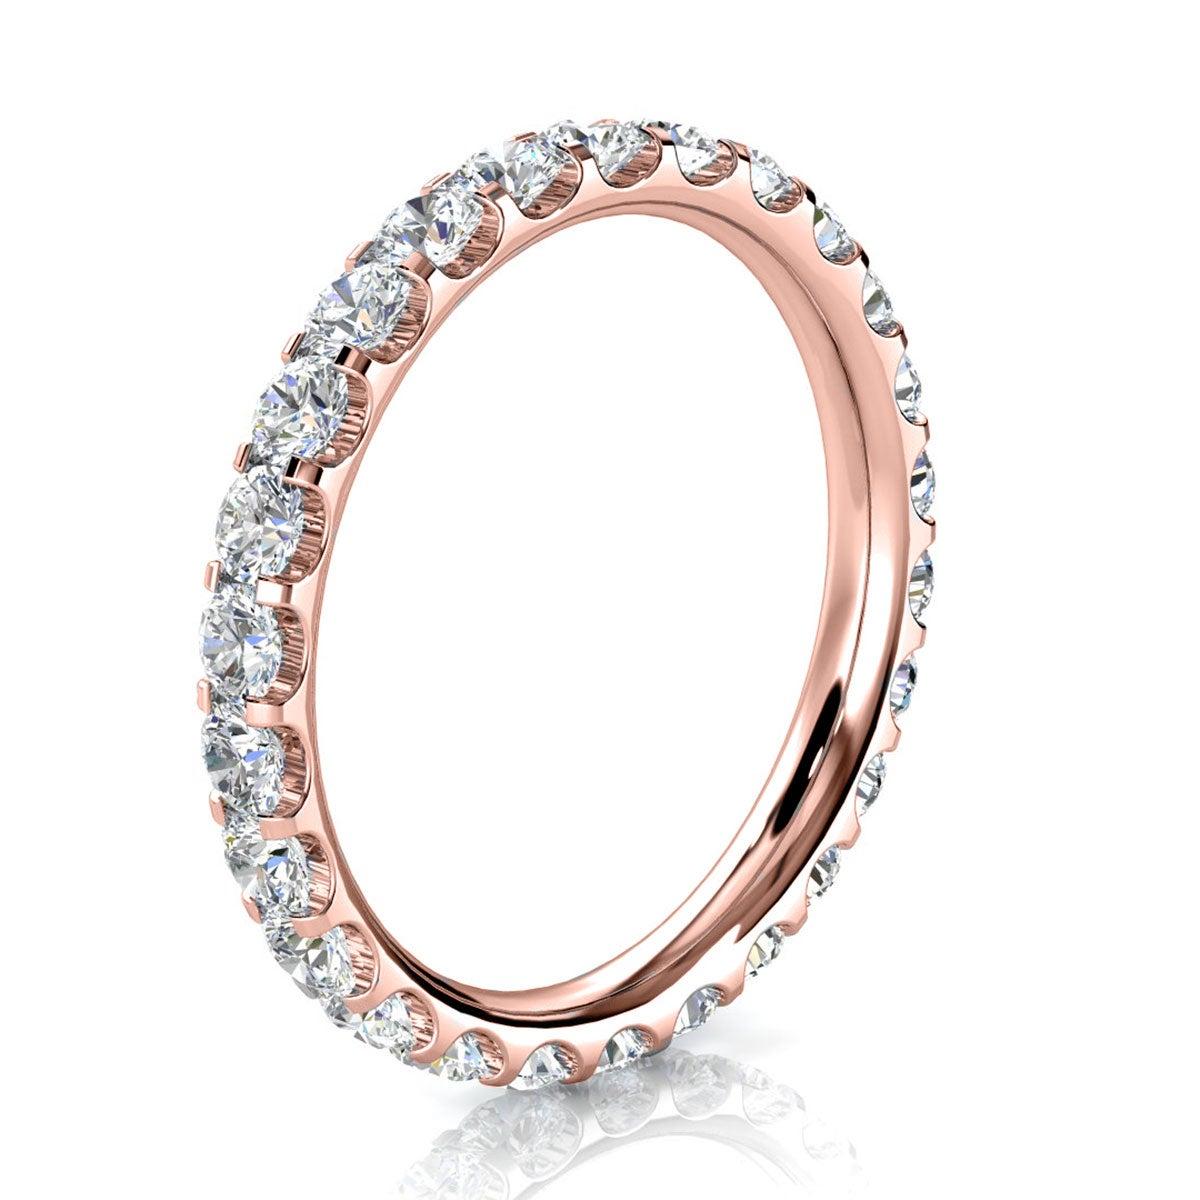 For Sale:  18K Rose Gold Viola Eternity Micro-Prong Diamond Ring '1 Ct. tw' 2